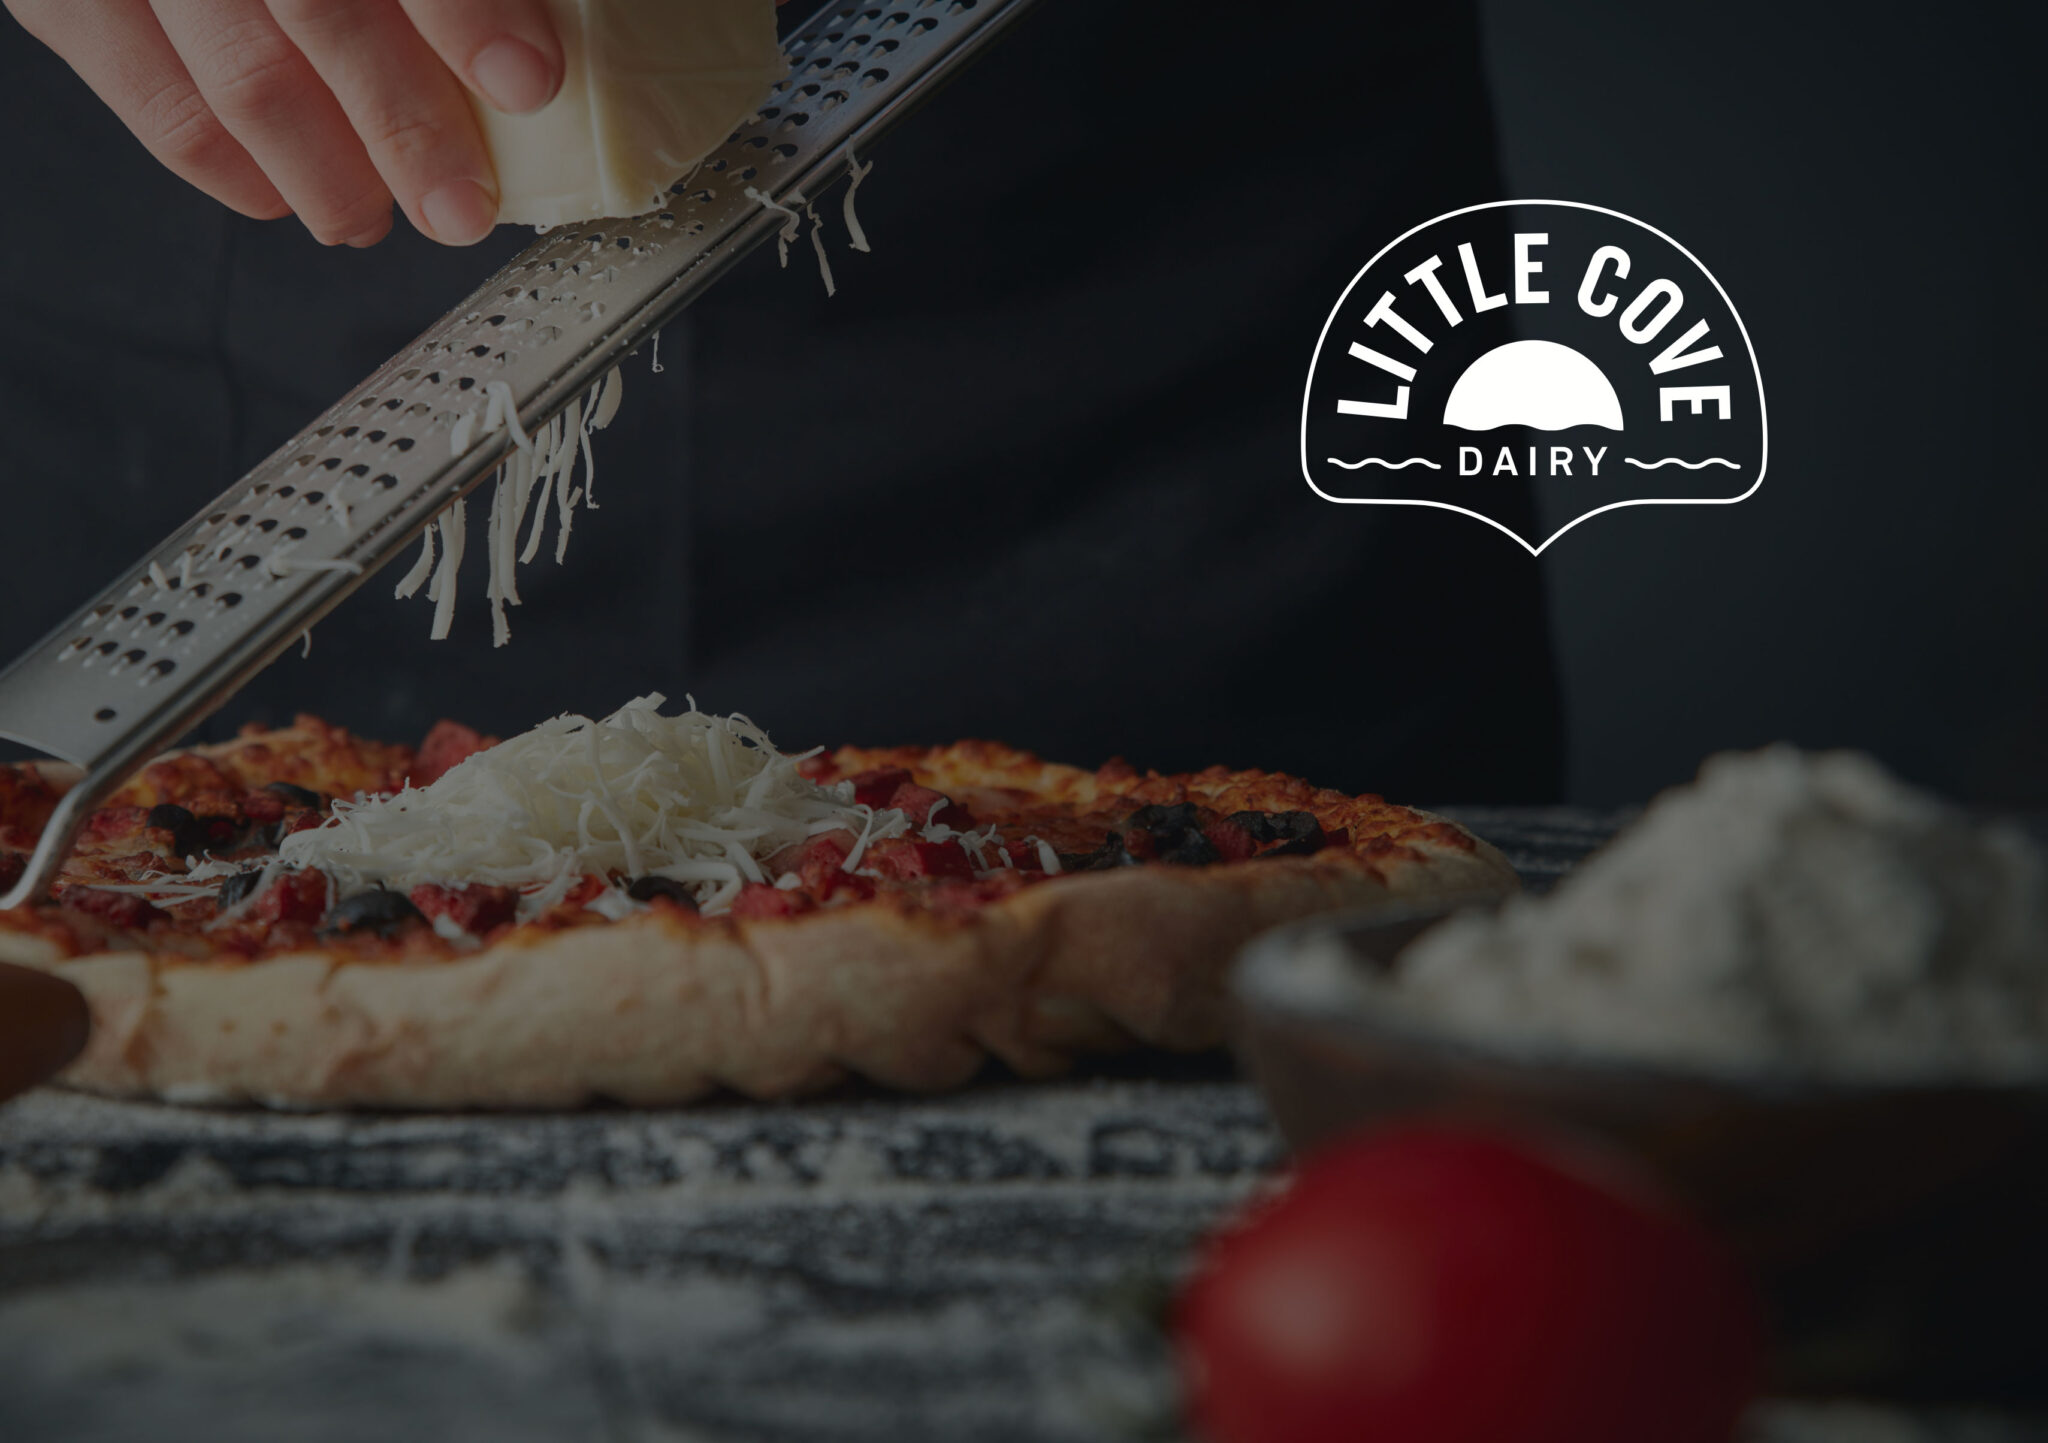 little cove dairy cheese packaging image with grated cheese on pizza